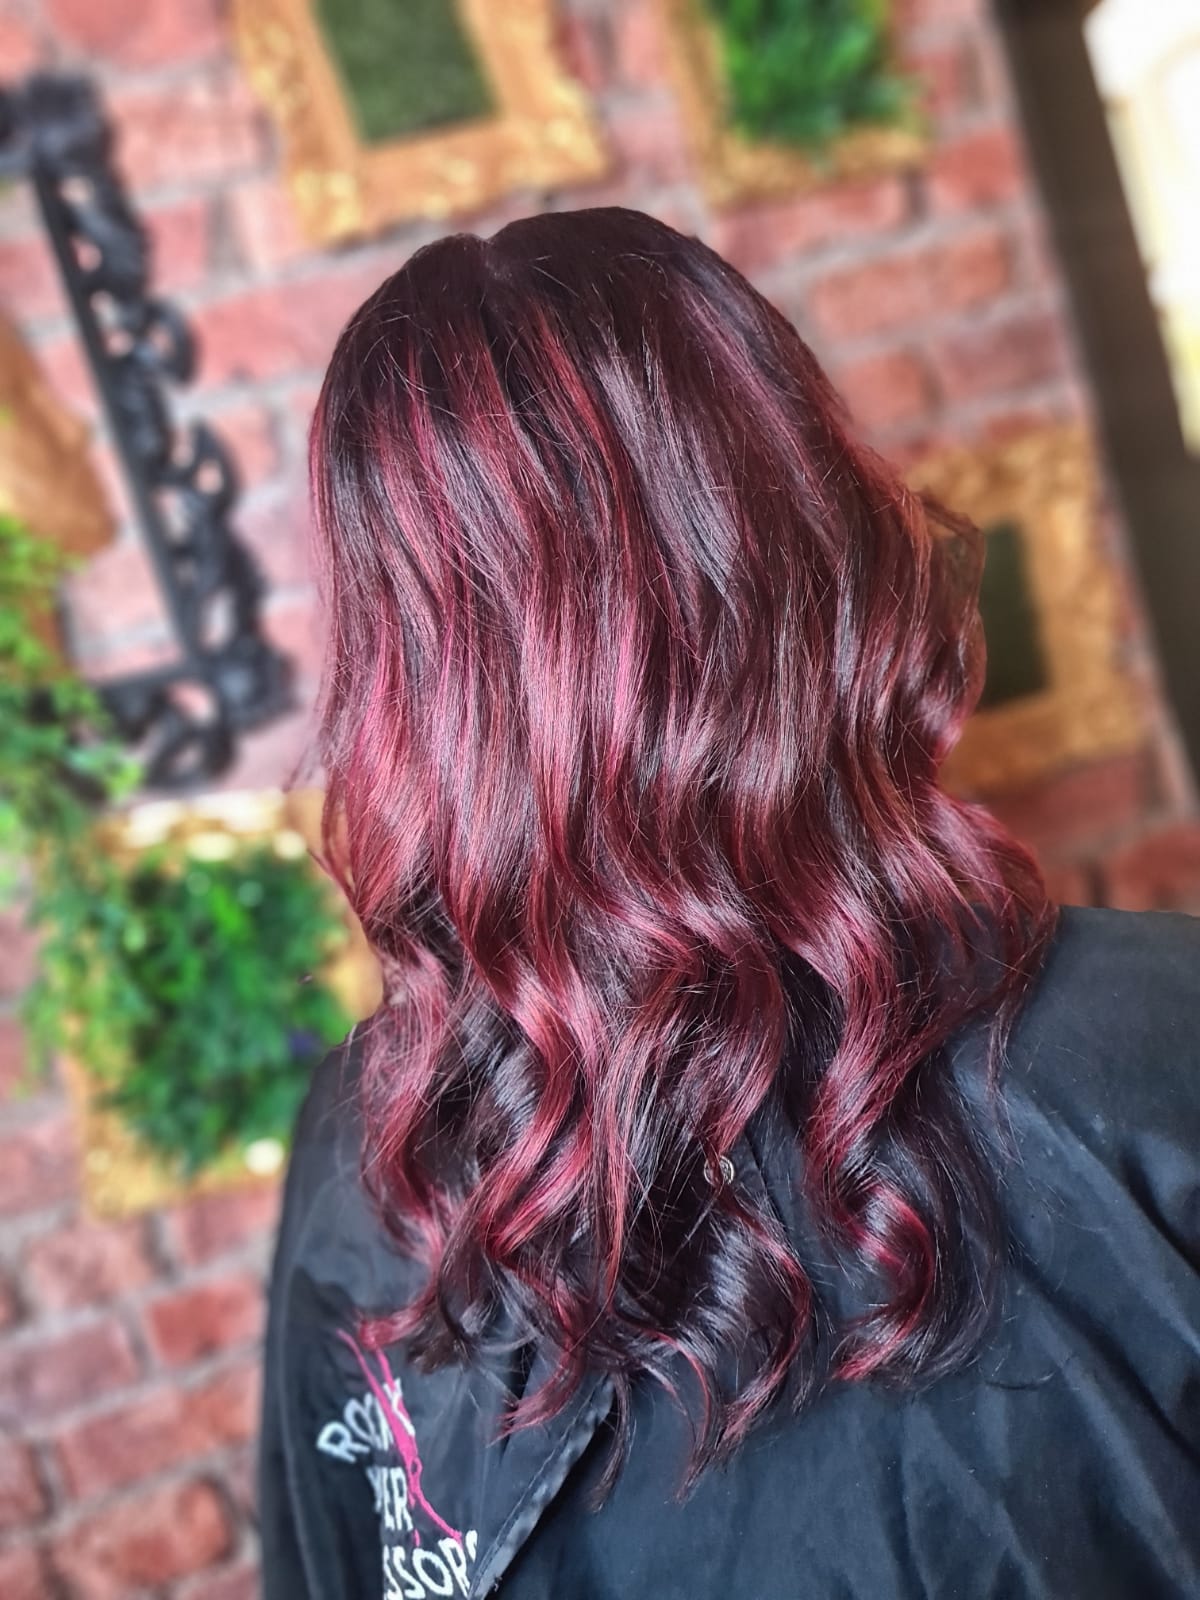 using Dark Violet to Light Red Violet for this beautiful Balayage